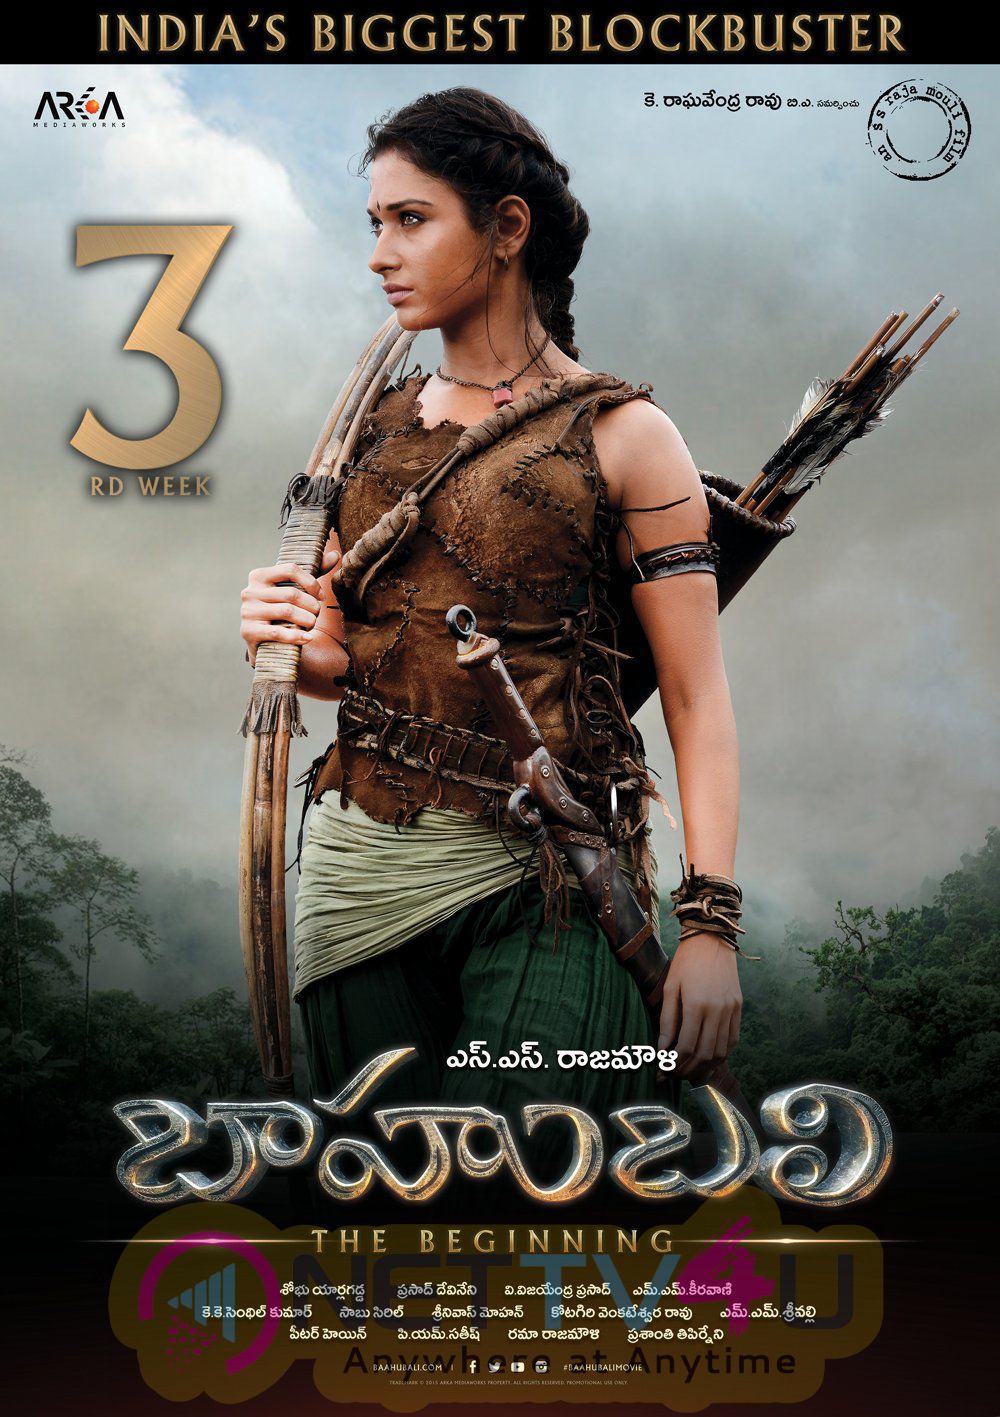 wallpapers and posters for baahubali telugu movie 30 days 5